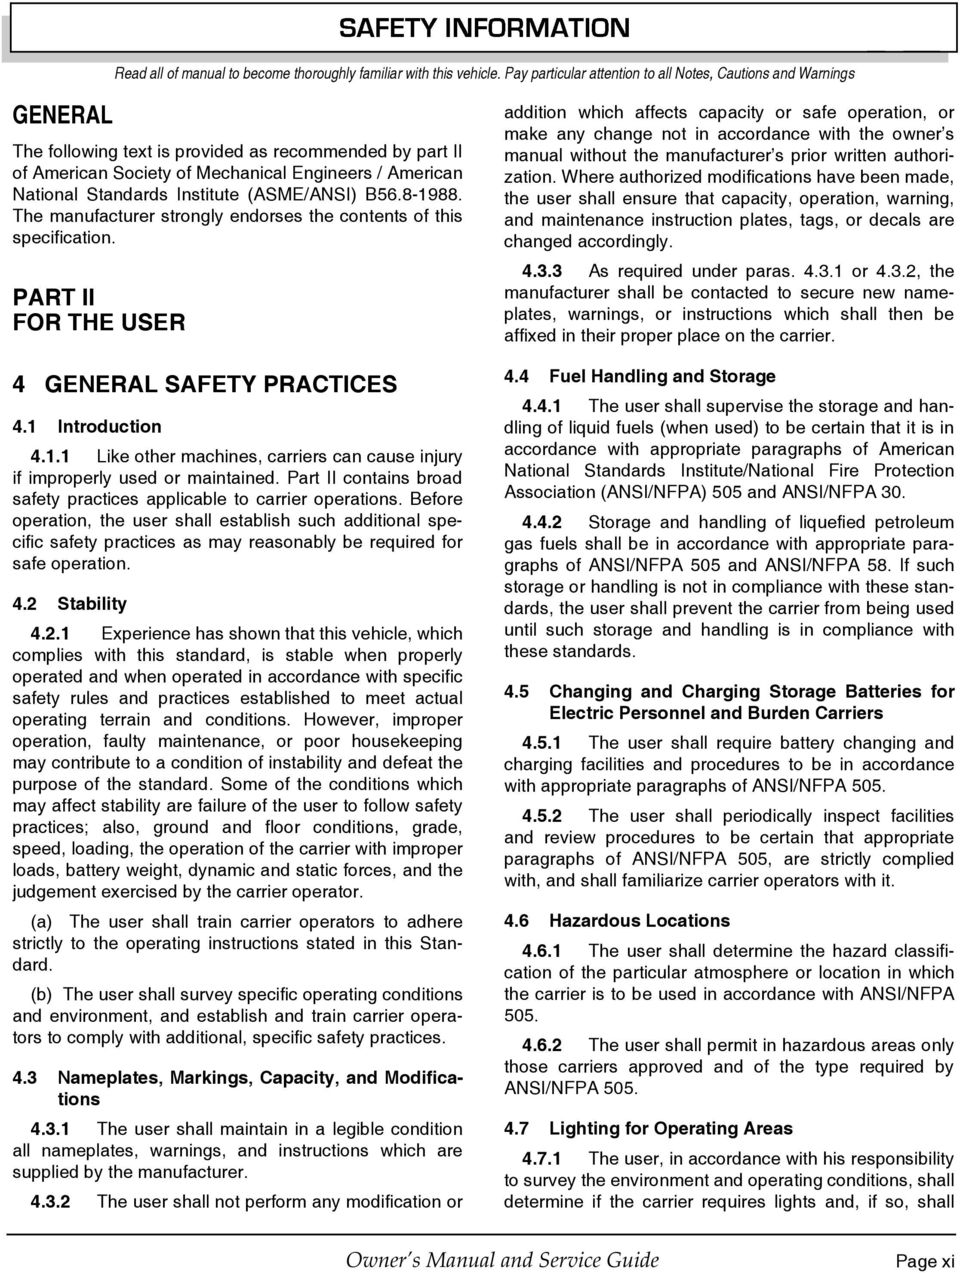 Institute (ASME/ANSI) B56.8-1988. The manufacturer strongly endorses the contents of this specification. PART II FOR THE USER 4 GENERAL SAFETY PRACTICES 4.1 Introduction 4.1.1 Like other machines, carriers can cause injury if improperly used or maintained.